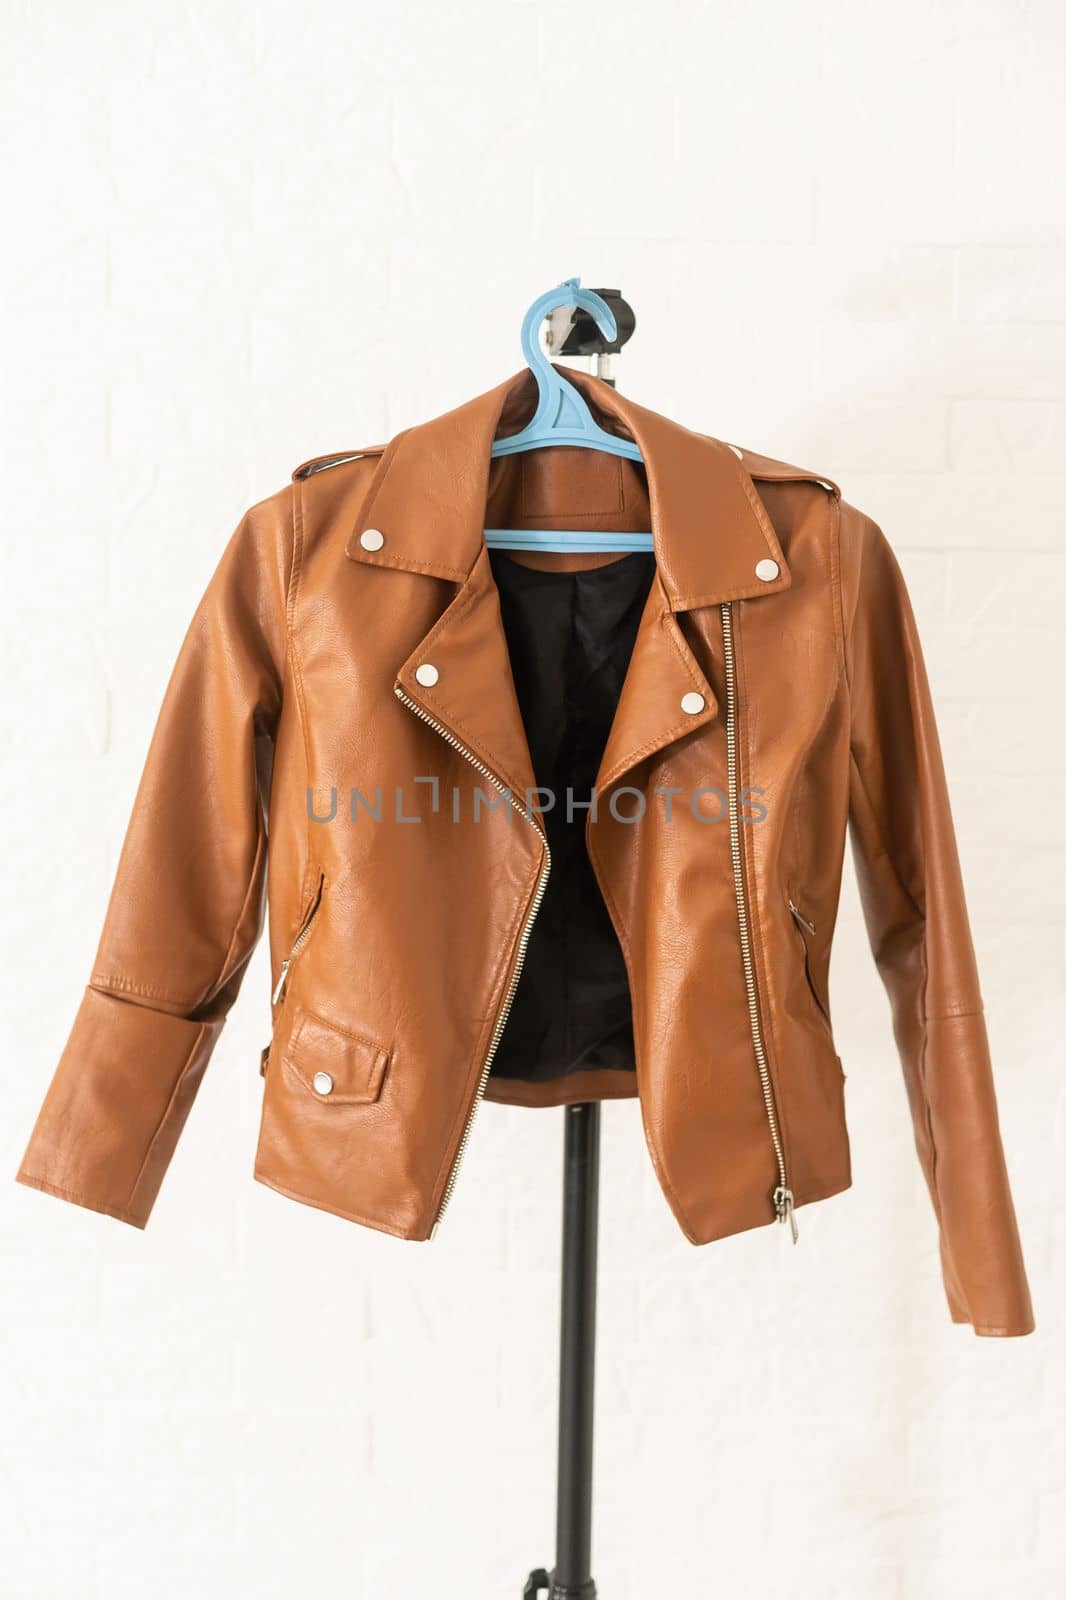 women's jacket on a hanger white background by Andelov13